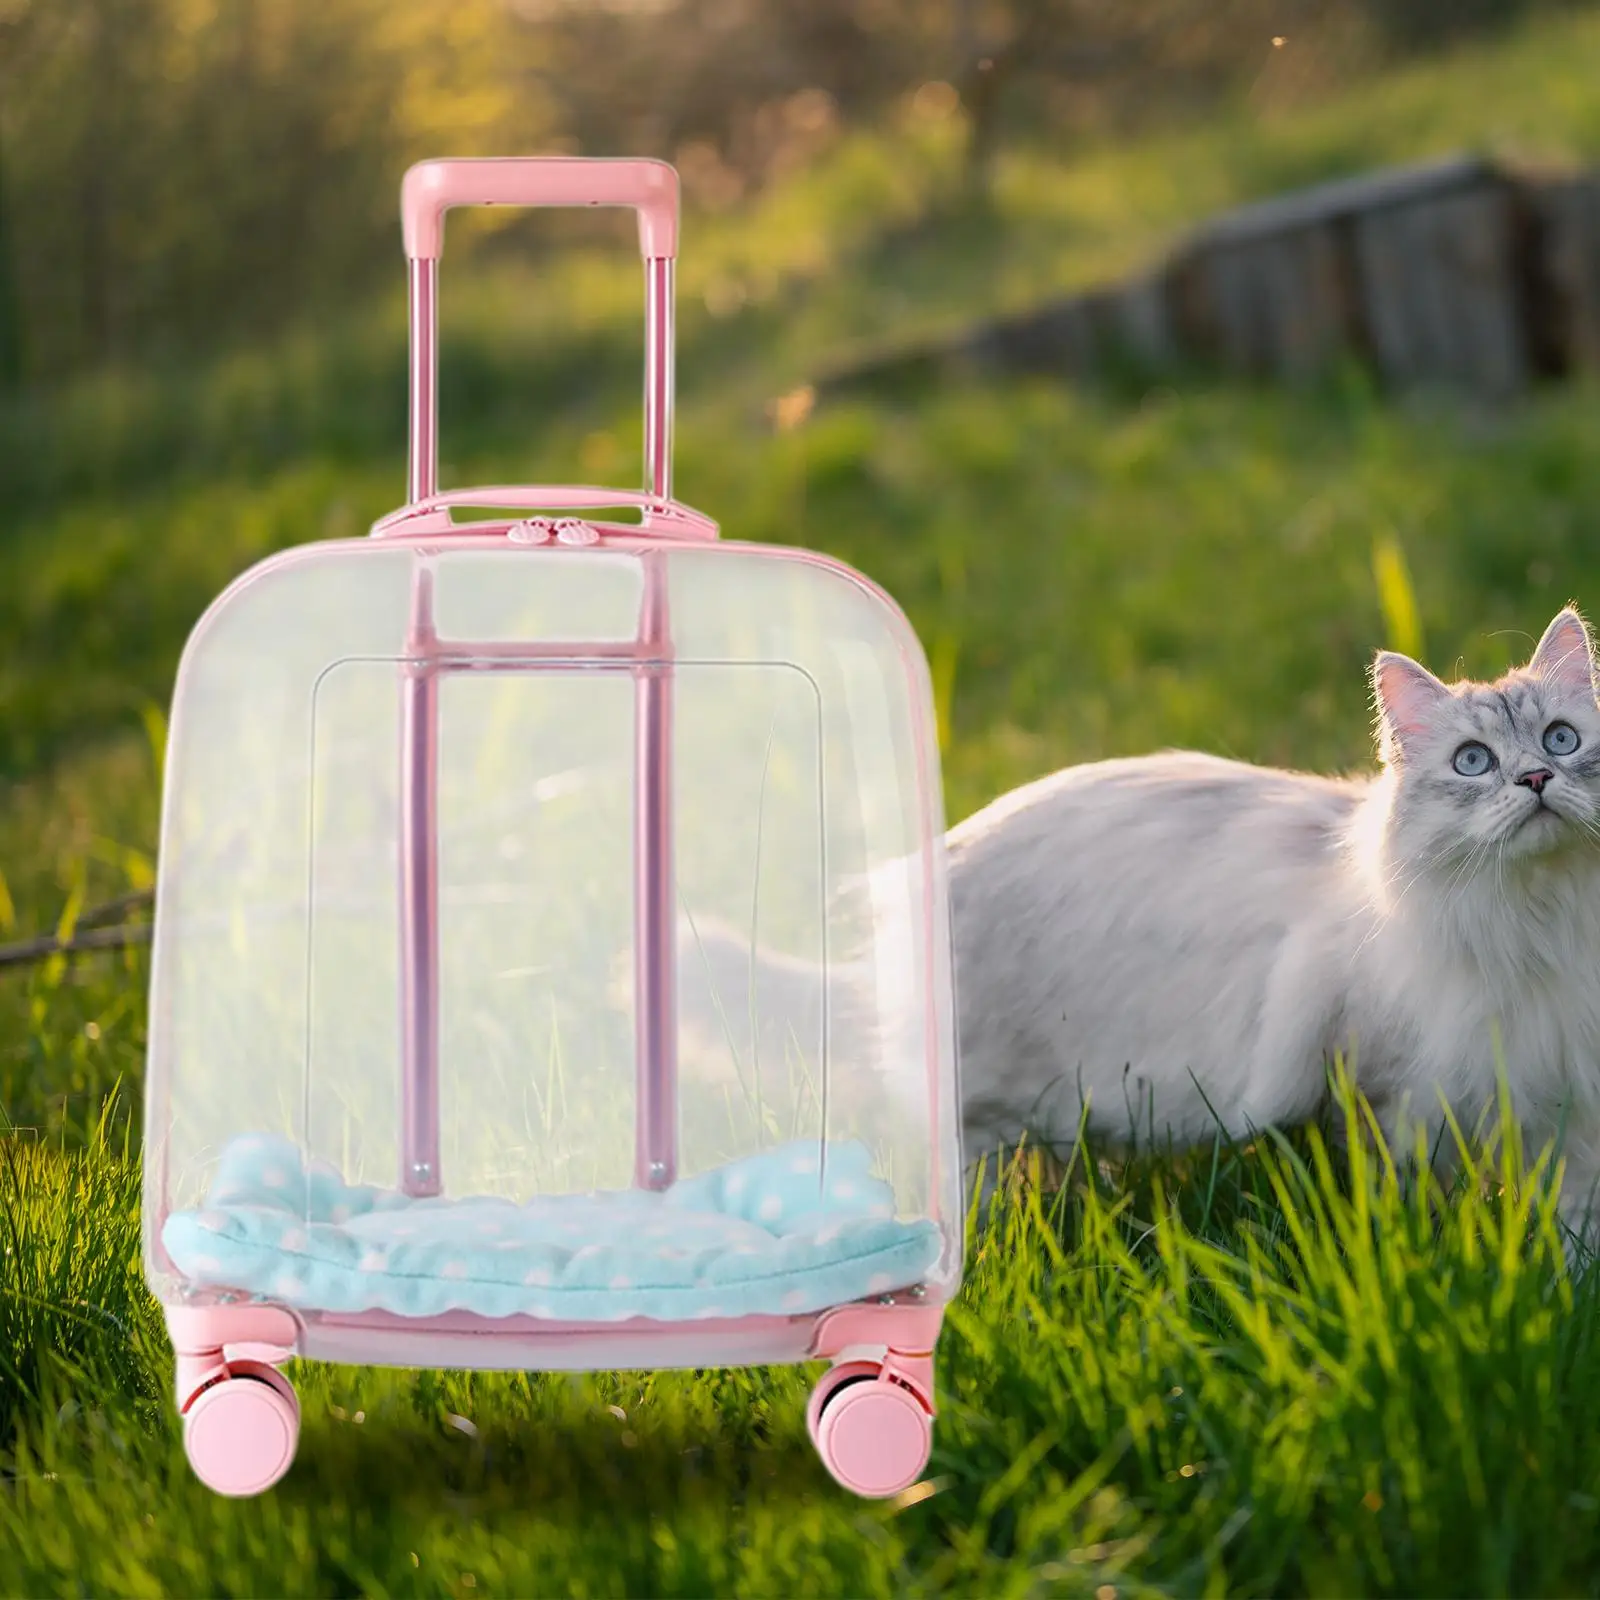 Cat Trolley Case Dog Handbag Breathable with Handle Pet Rolling Carrier for Small Animals Kitten Kitty Outdoor Traveling Hiking